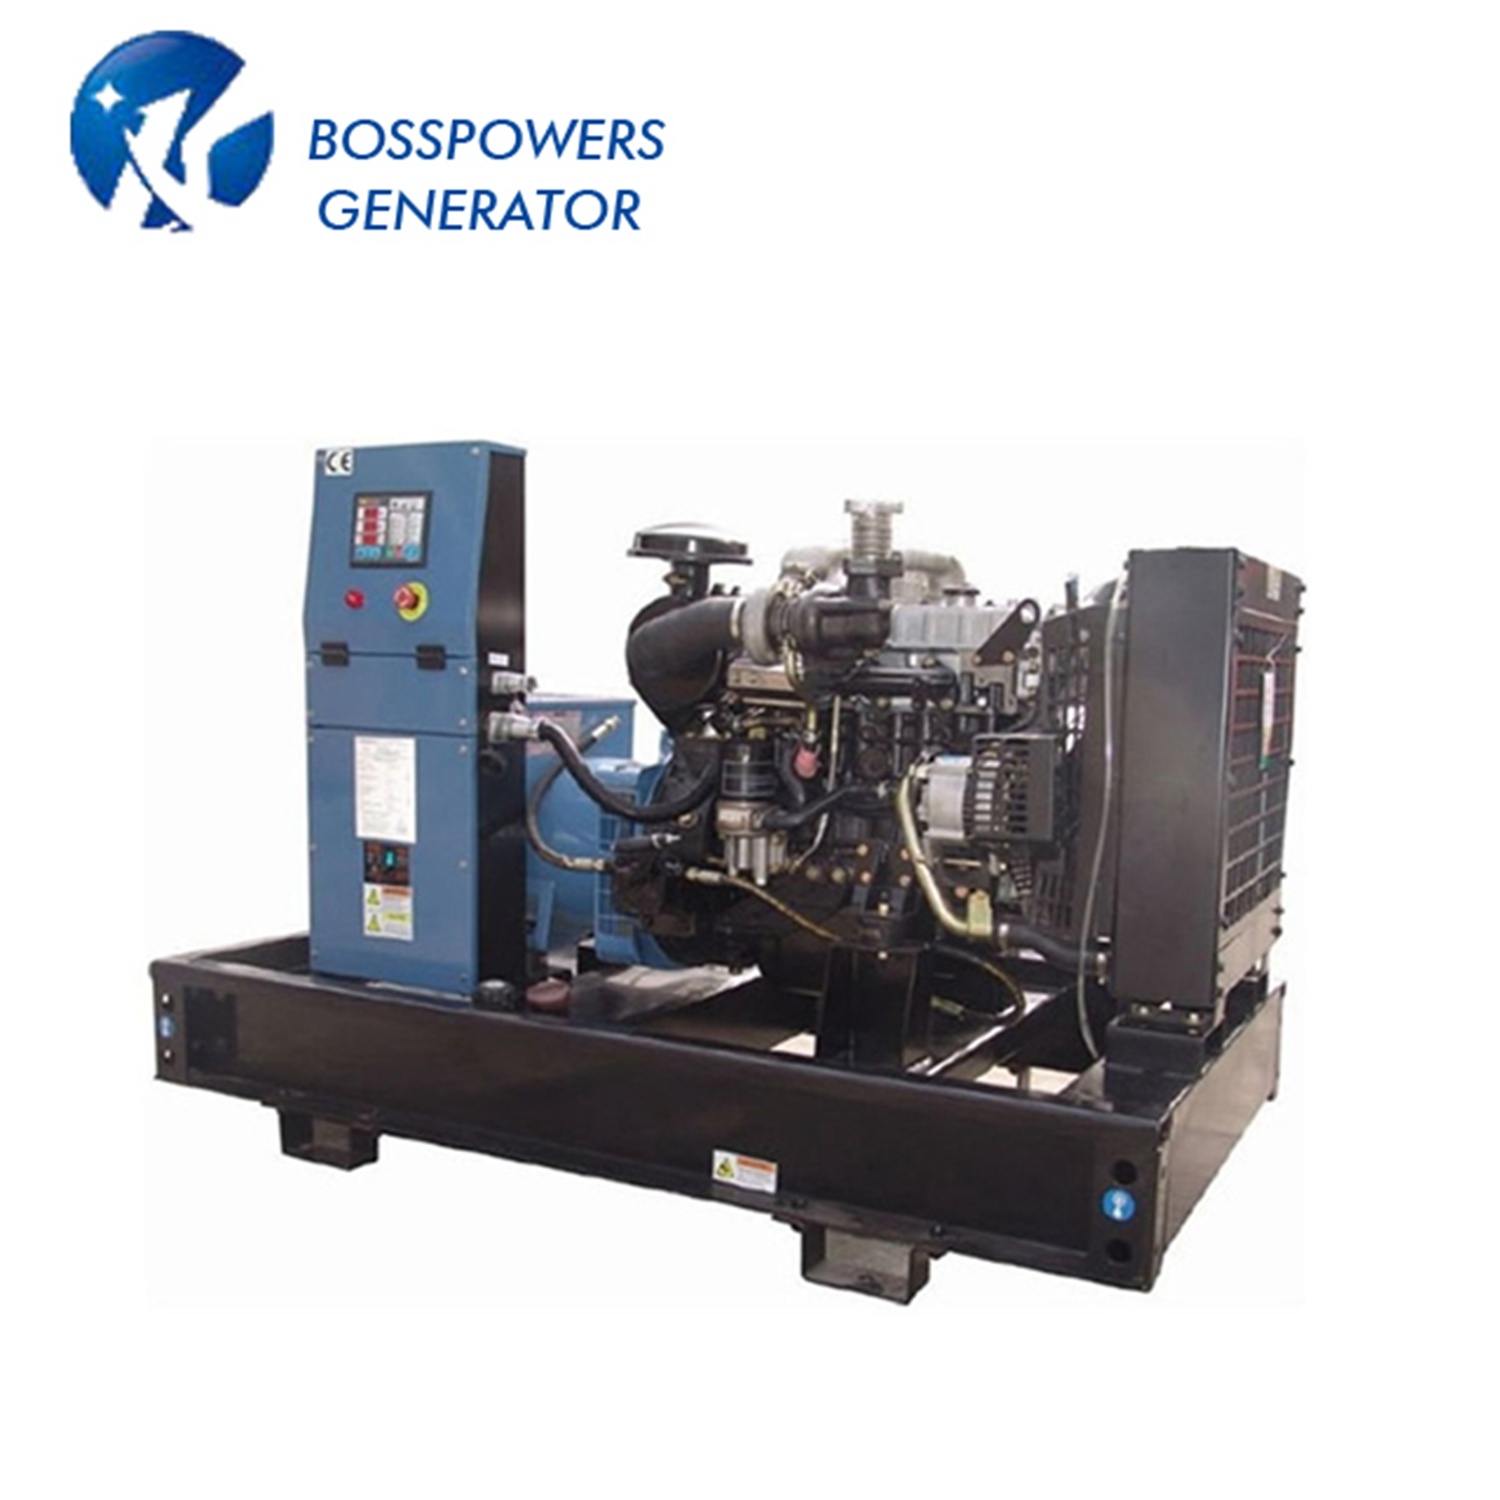 Whole New Mitsubishi Low Fuel Consumption Diesel Generator